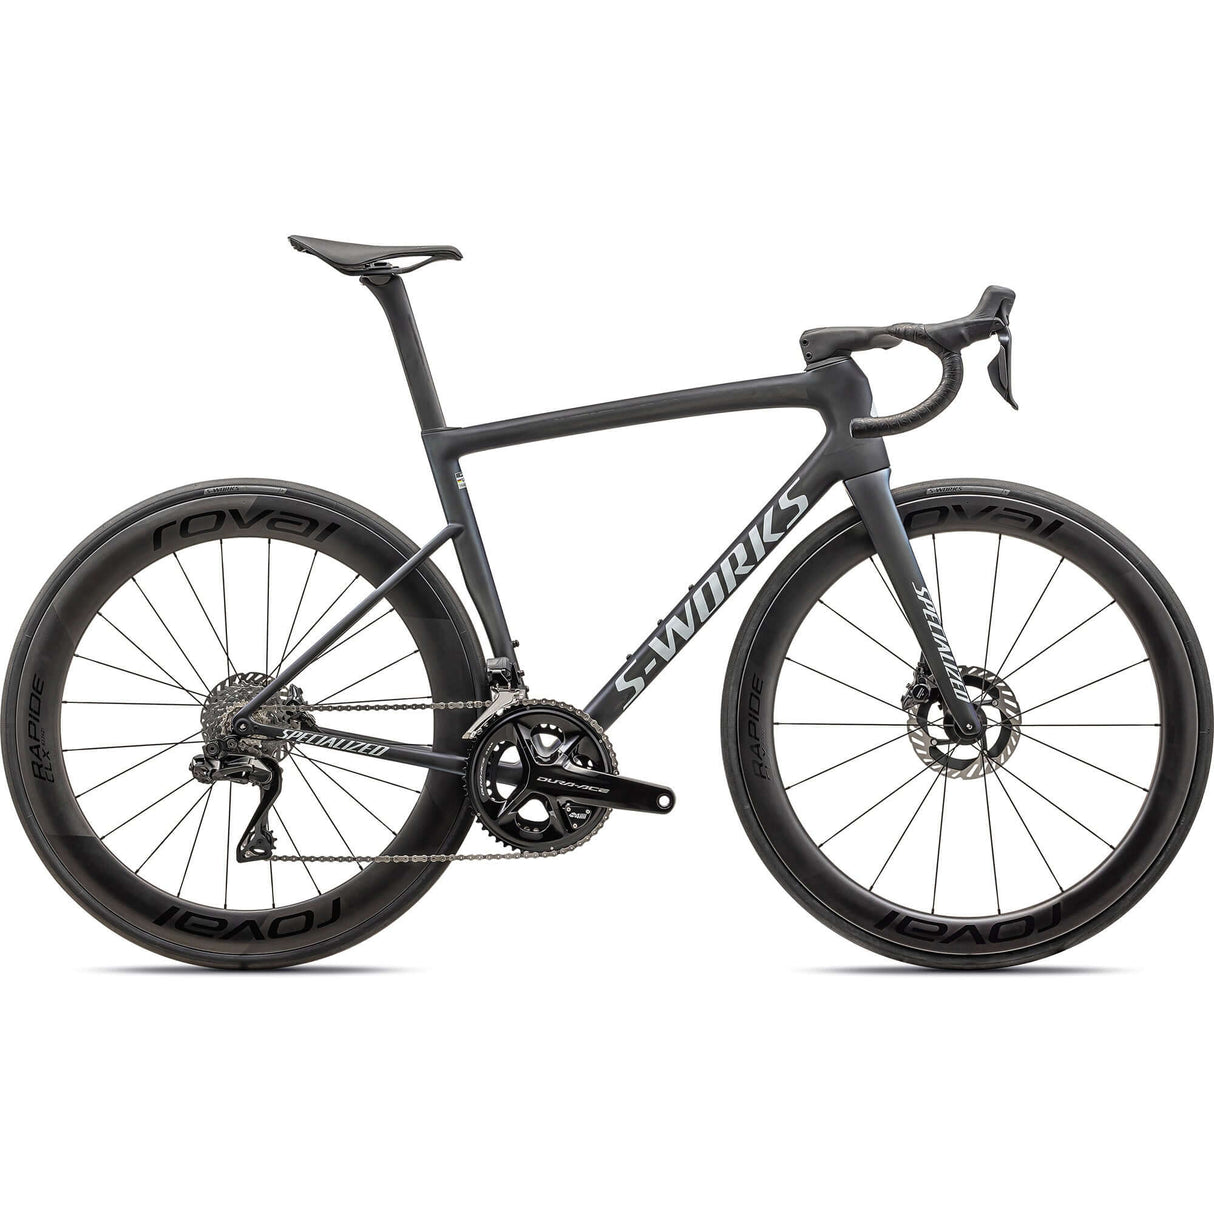 Specialized S-Works Tarmac SL8 - Shimano Dura-Ace Di2 | Strictly Bicycles